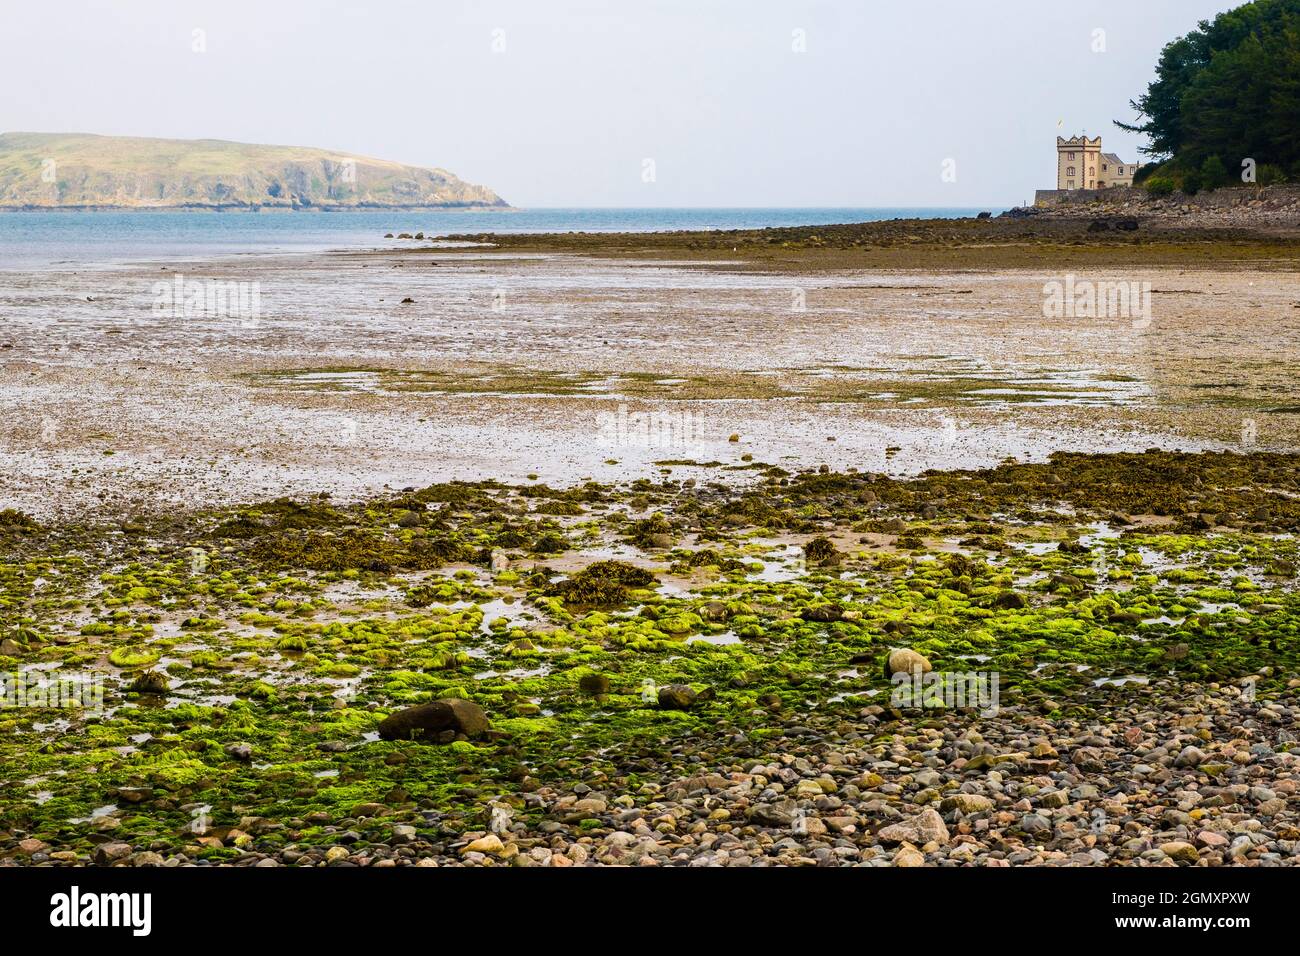 Hestan Island and The Tower seen across Balcary Bay at low tide. Auchencairn, Dalbeattie, Dumfries and Galloway, Scotland, UK, Britain Stock Photo